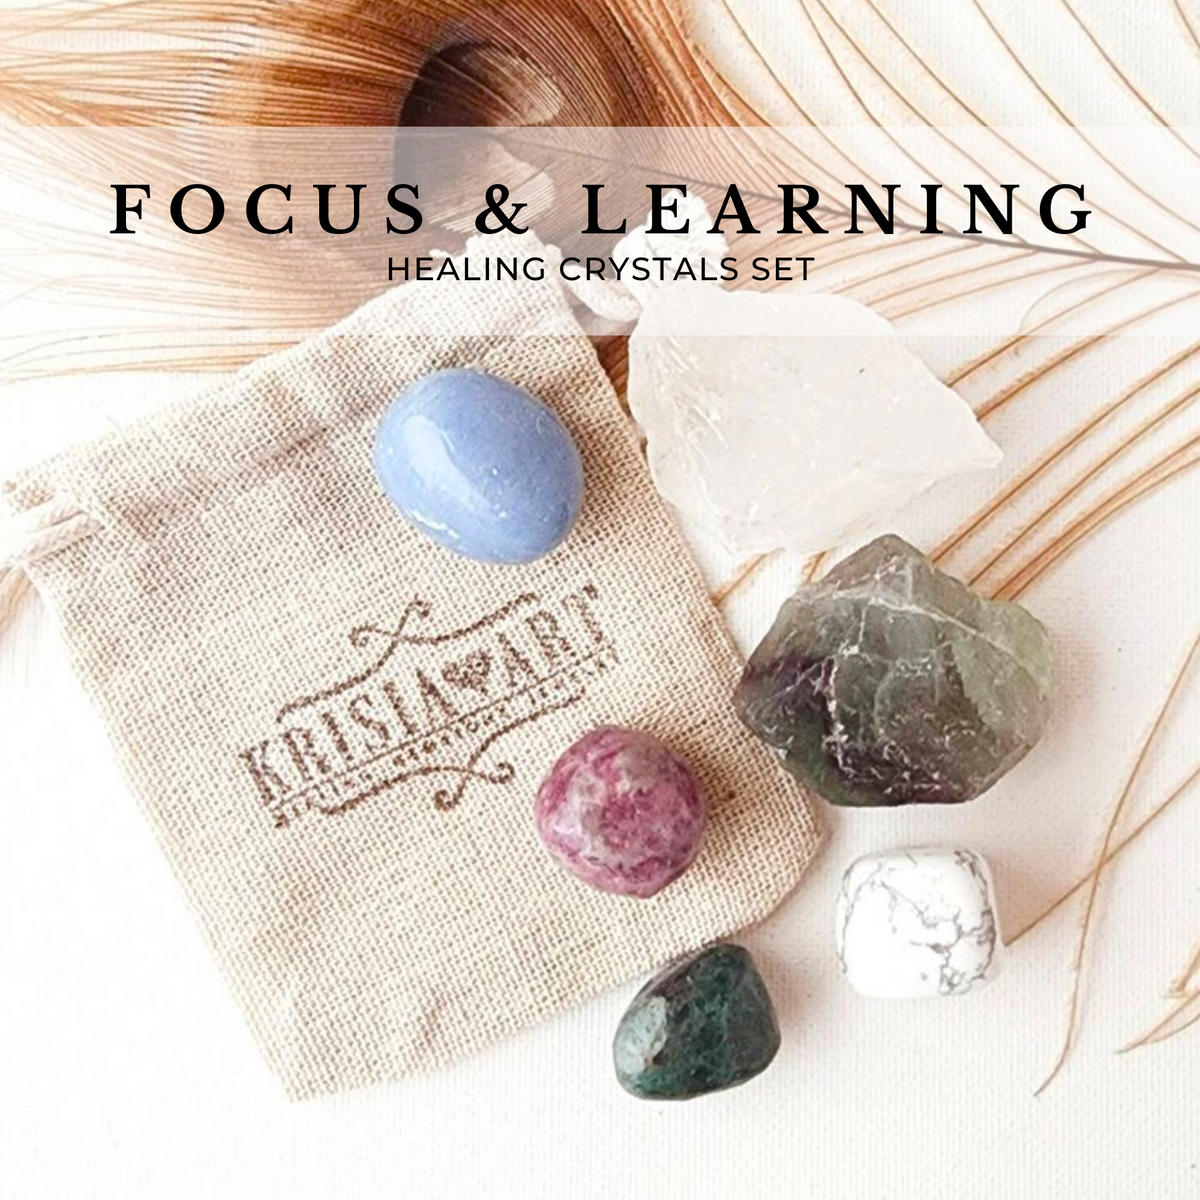 FOCUS & LEARNING crystal set for concentration, exam success, studying aid. Apatite, White Howlite, Lepidolite, Fluorite, Angelite, and Clear Quartz